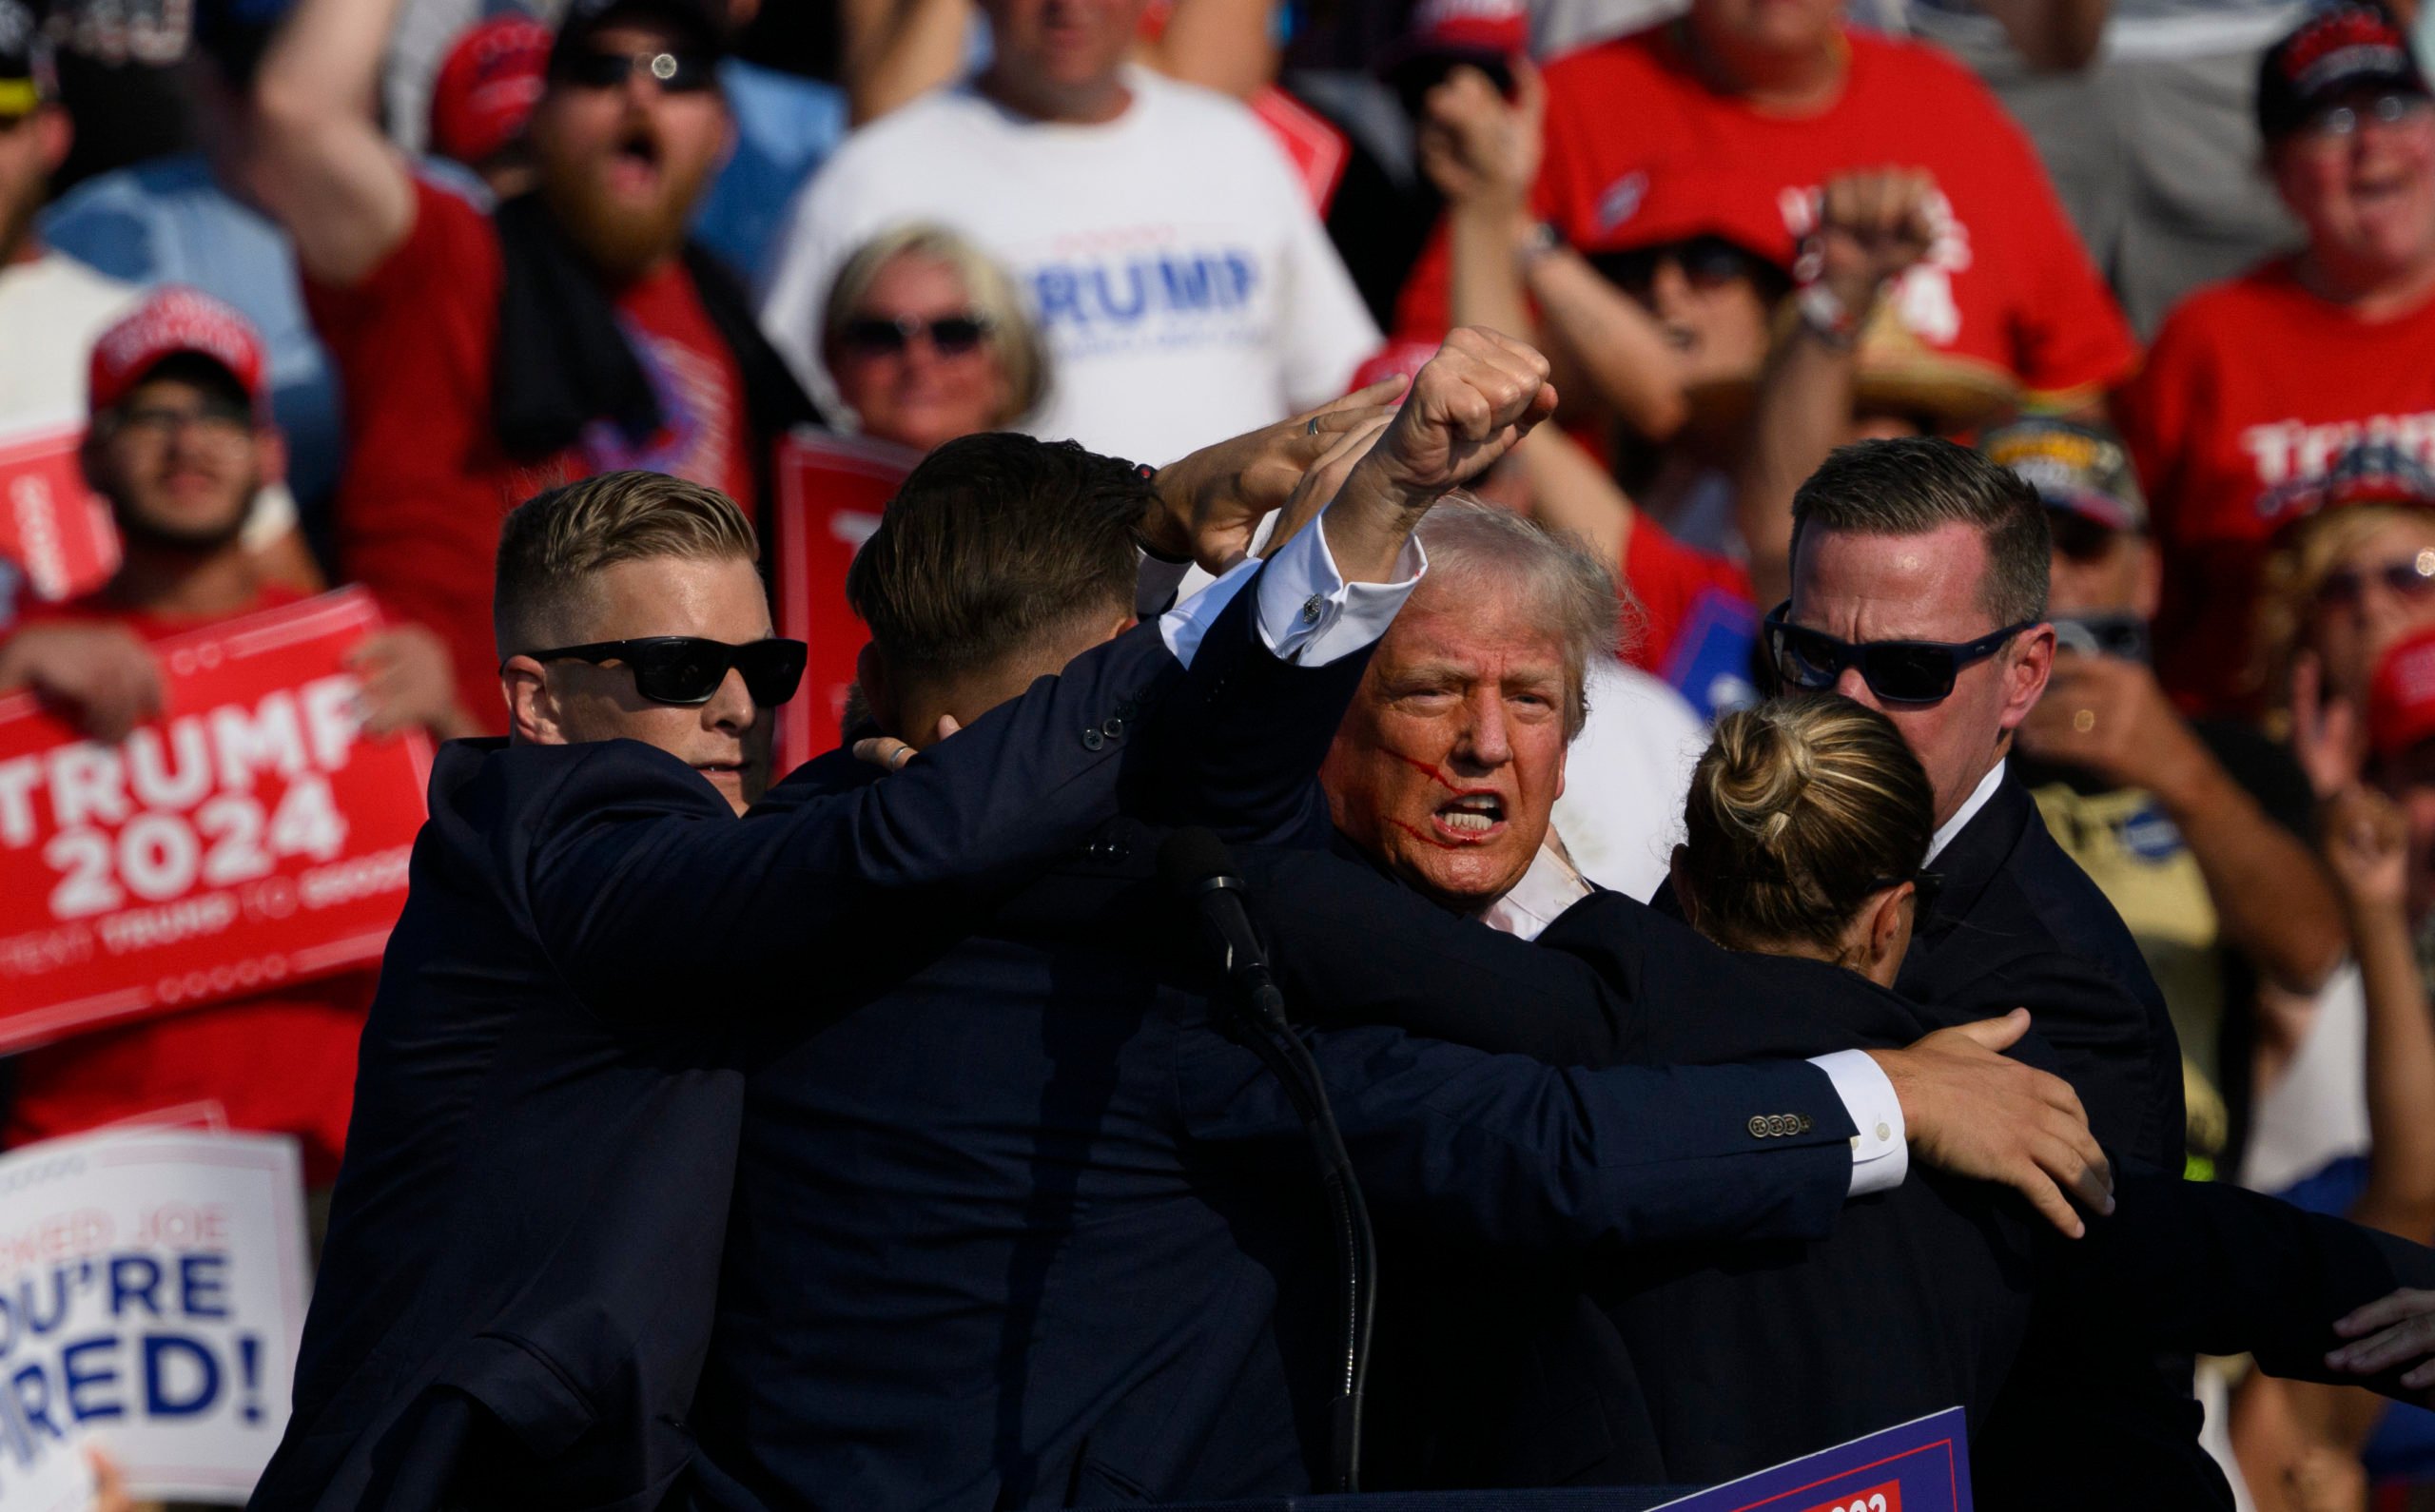 BUTLER, PENNSYLVANIA - JULY 13: Republican presidential candidate, former U.S. President Donald Trump is whisked away by Secret Service after shots rang out at a campaign rally at Butler Farm Show Inc. on July 13, 2024 in Butler, Pennsylvania. Trump slumped and injuries were visible to the side of his head. Butler County district attorney Richard Goldinger said the shooter and one audience member are dead and another was injured. (Photo by Jeff Swensen/Getty Images)